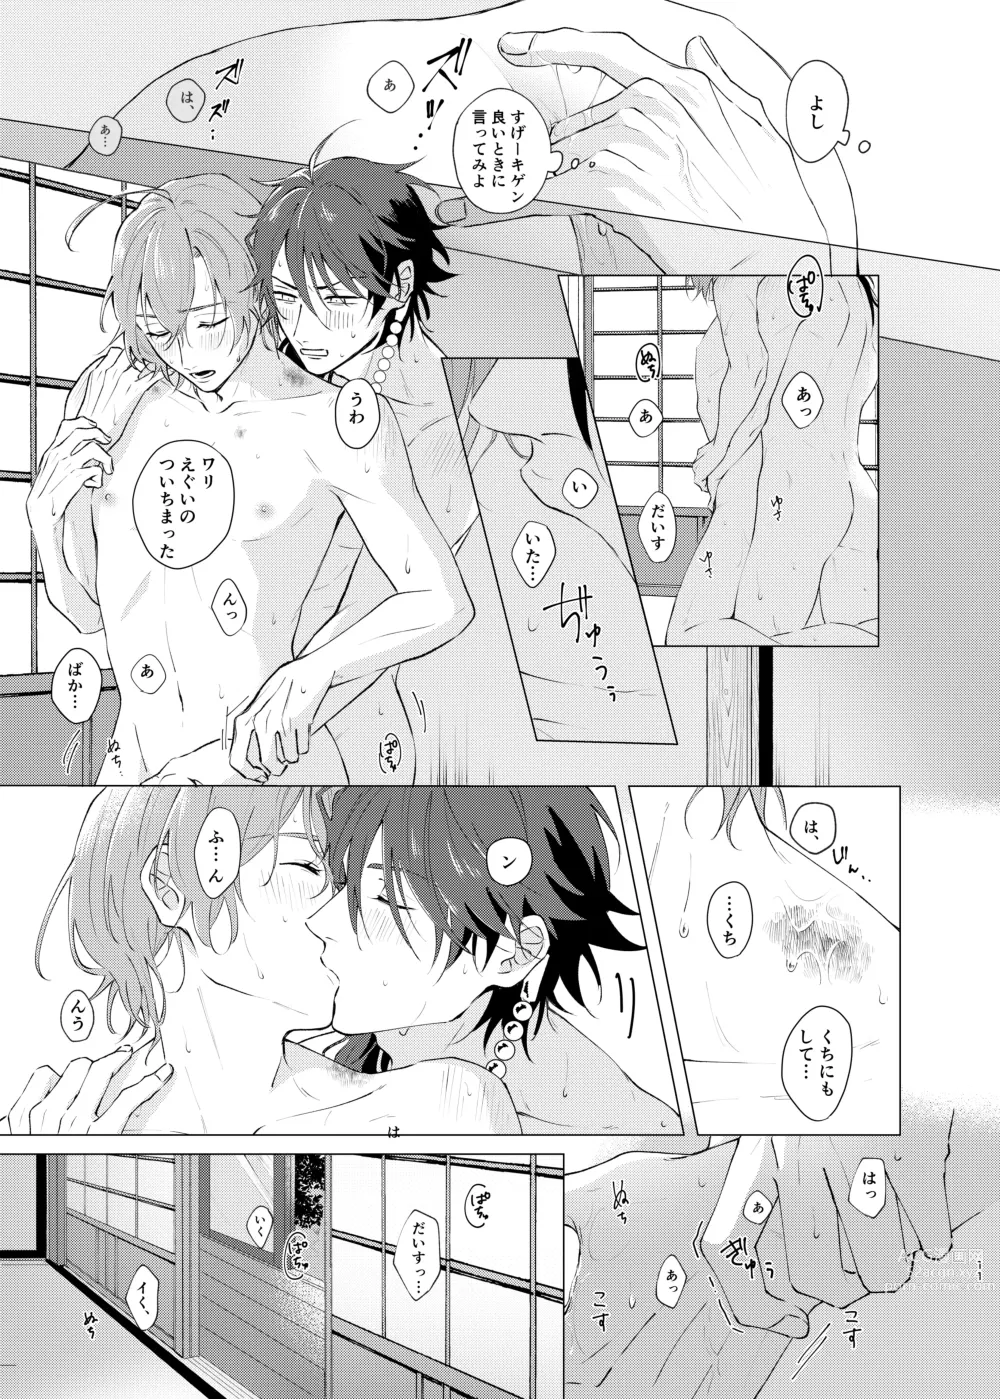 Page 9 of doujinshi Im leaving for good.